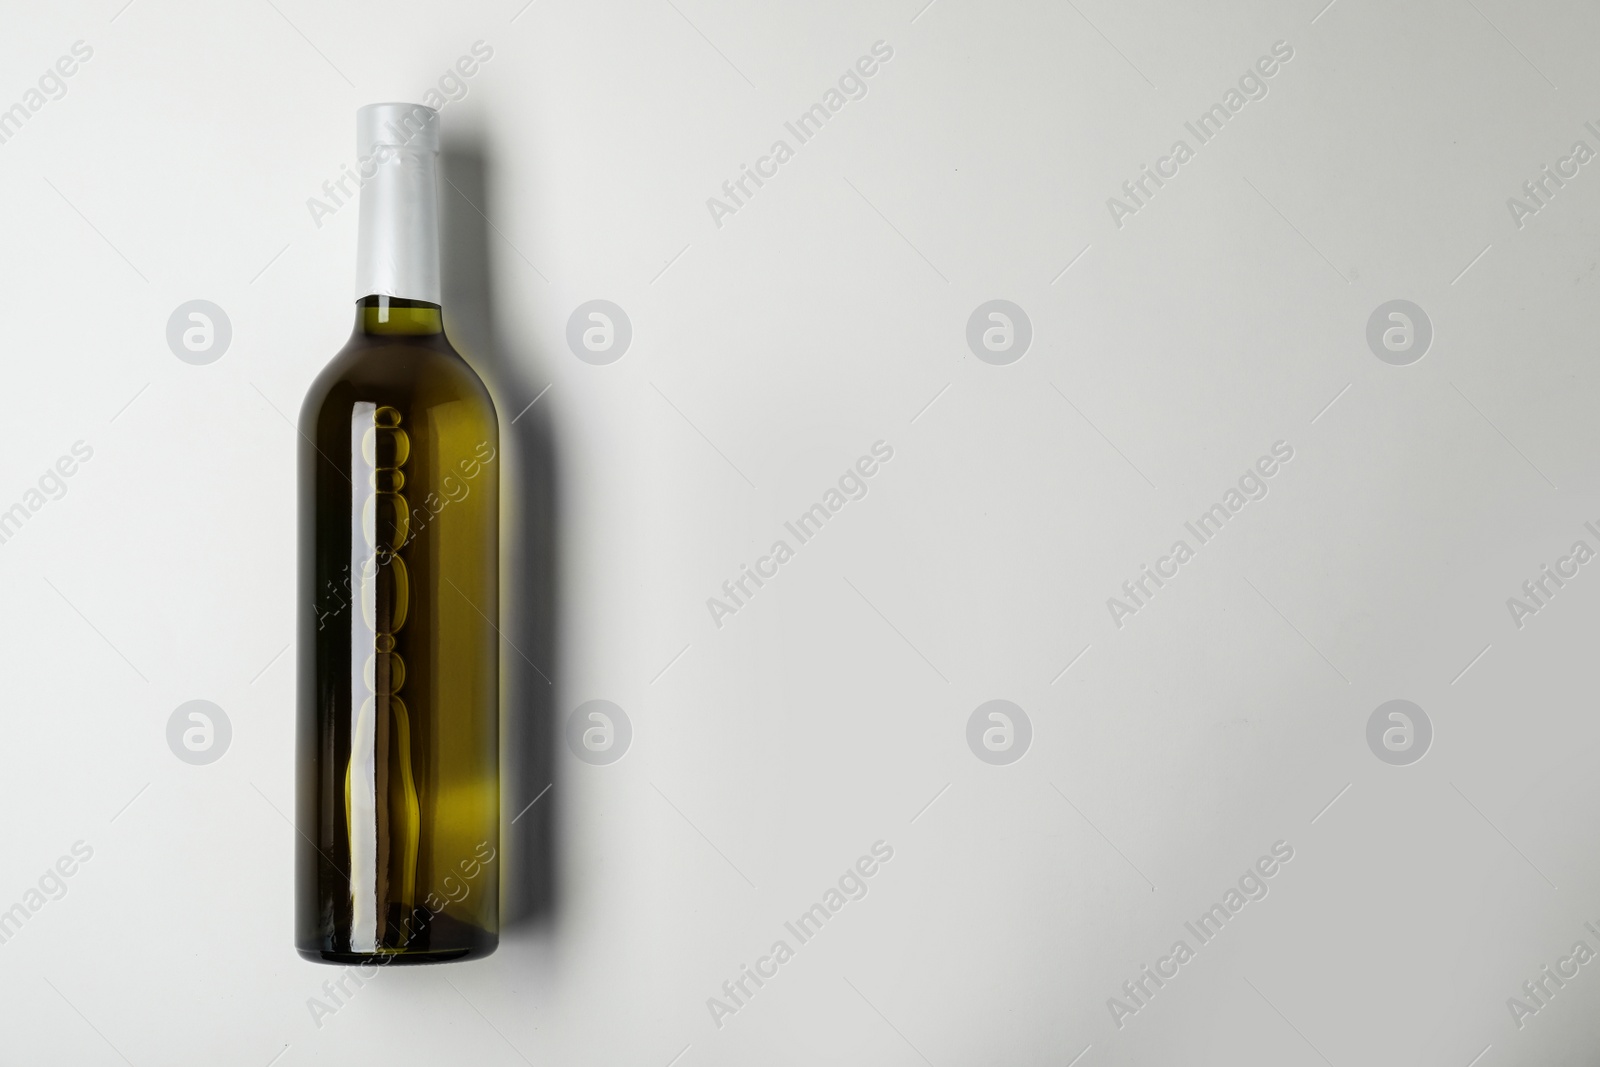 Photo of Bottle of expensive white wine on light background, top view